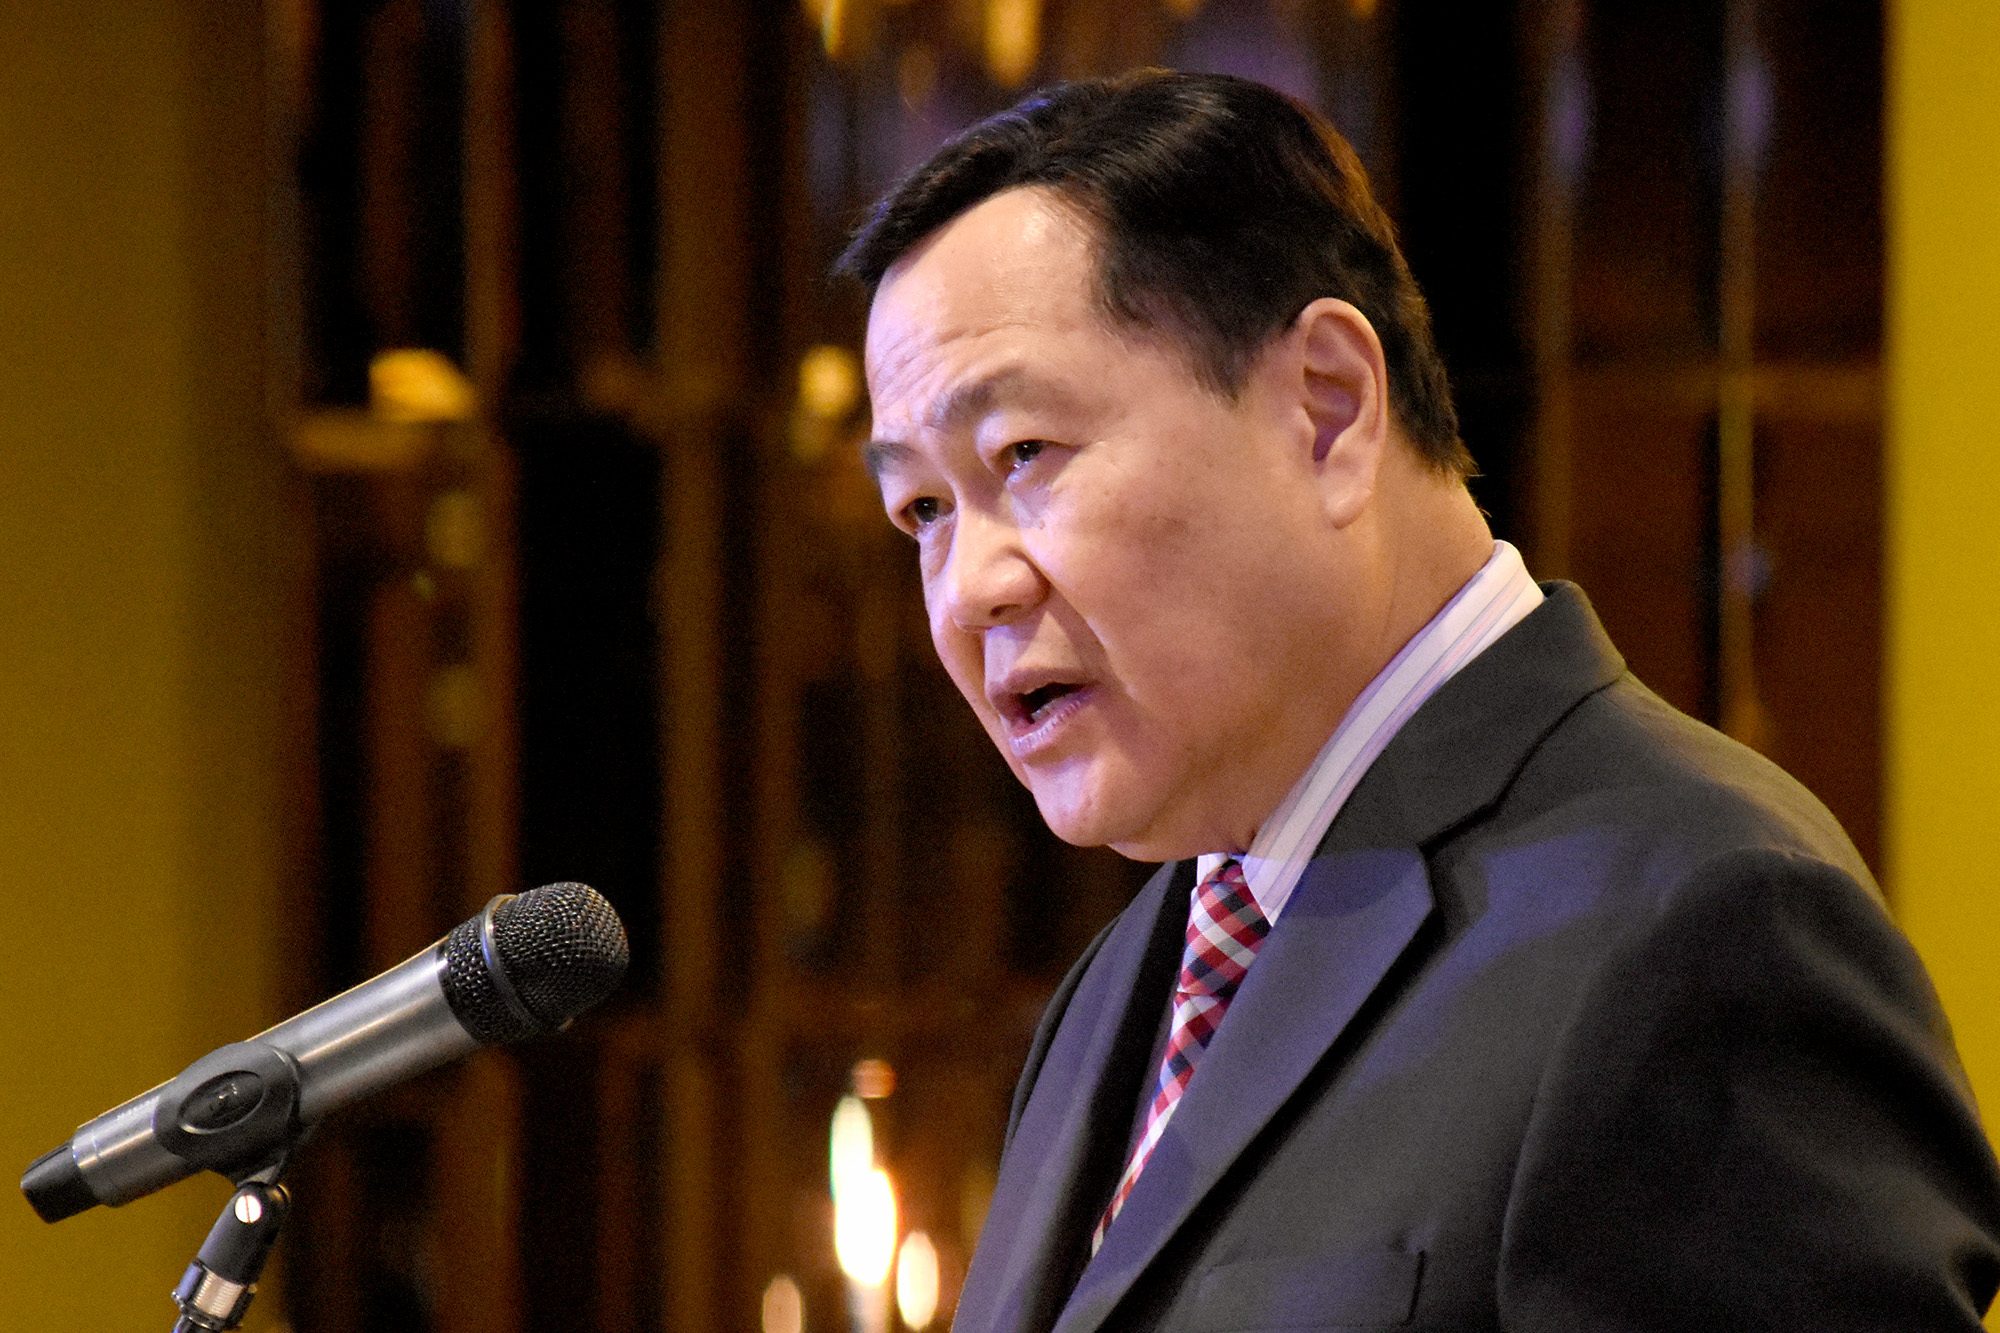 WEST PHILIPPINE SEA. Acting Chief Justice Antonio Carpio speaks at the 'Kasarinlan' foreign policy forum on July 9, 2018, in Intramuros, Manila. Photo by Angie de Silva/Rappler 